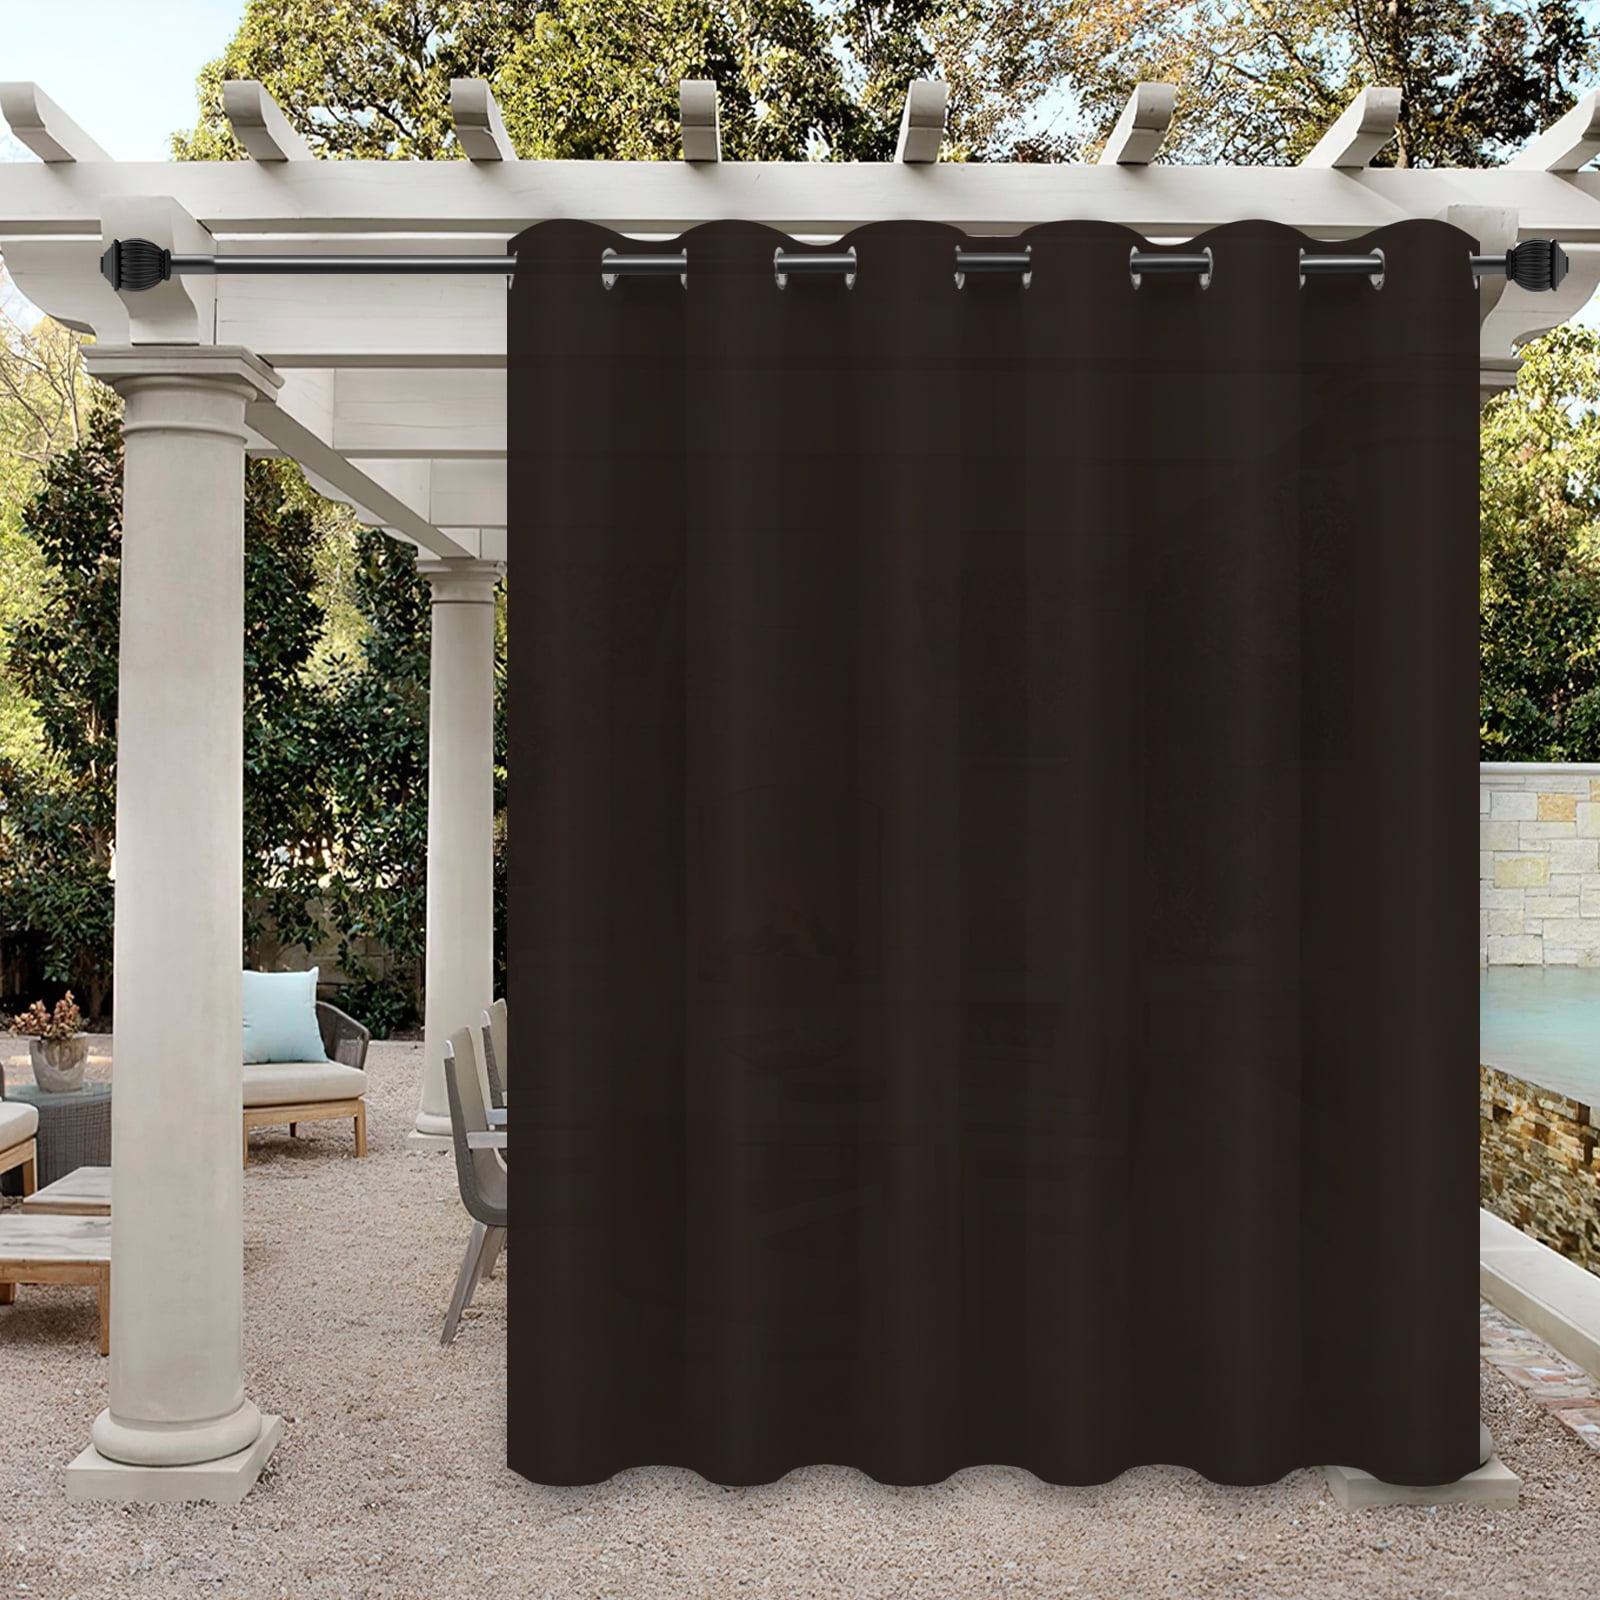 Easy-Going Outdoor Curtains for Patio Waterproof Cabana Grommet Curtain Panel, Chocolate, 100 x 84 inch, One Panel